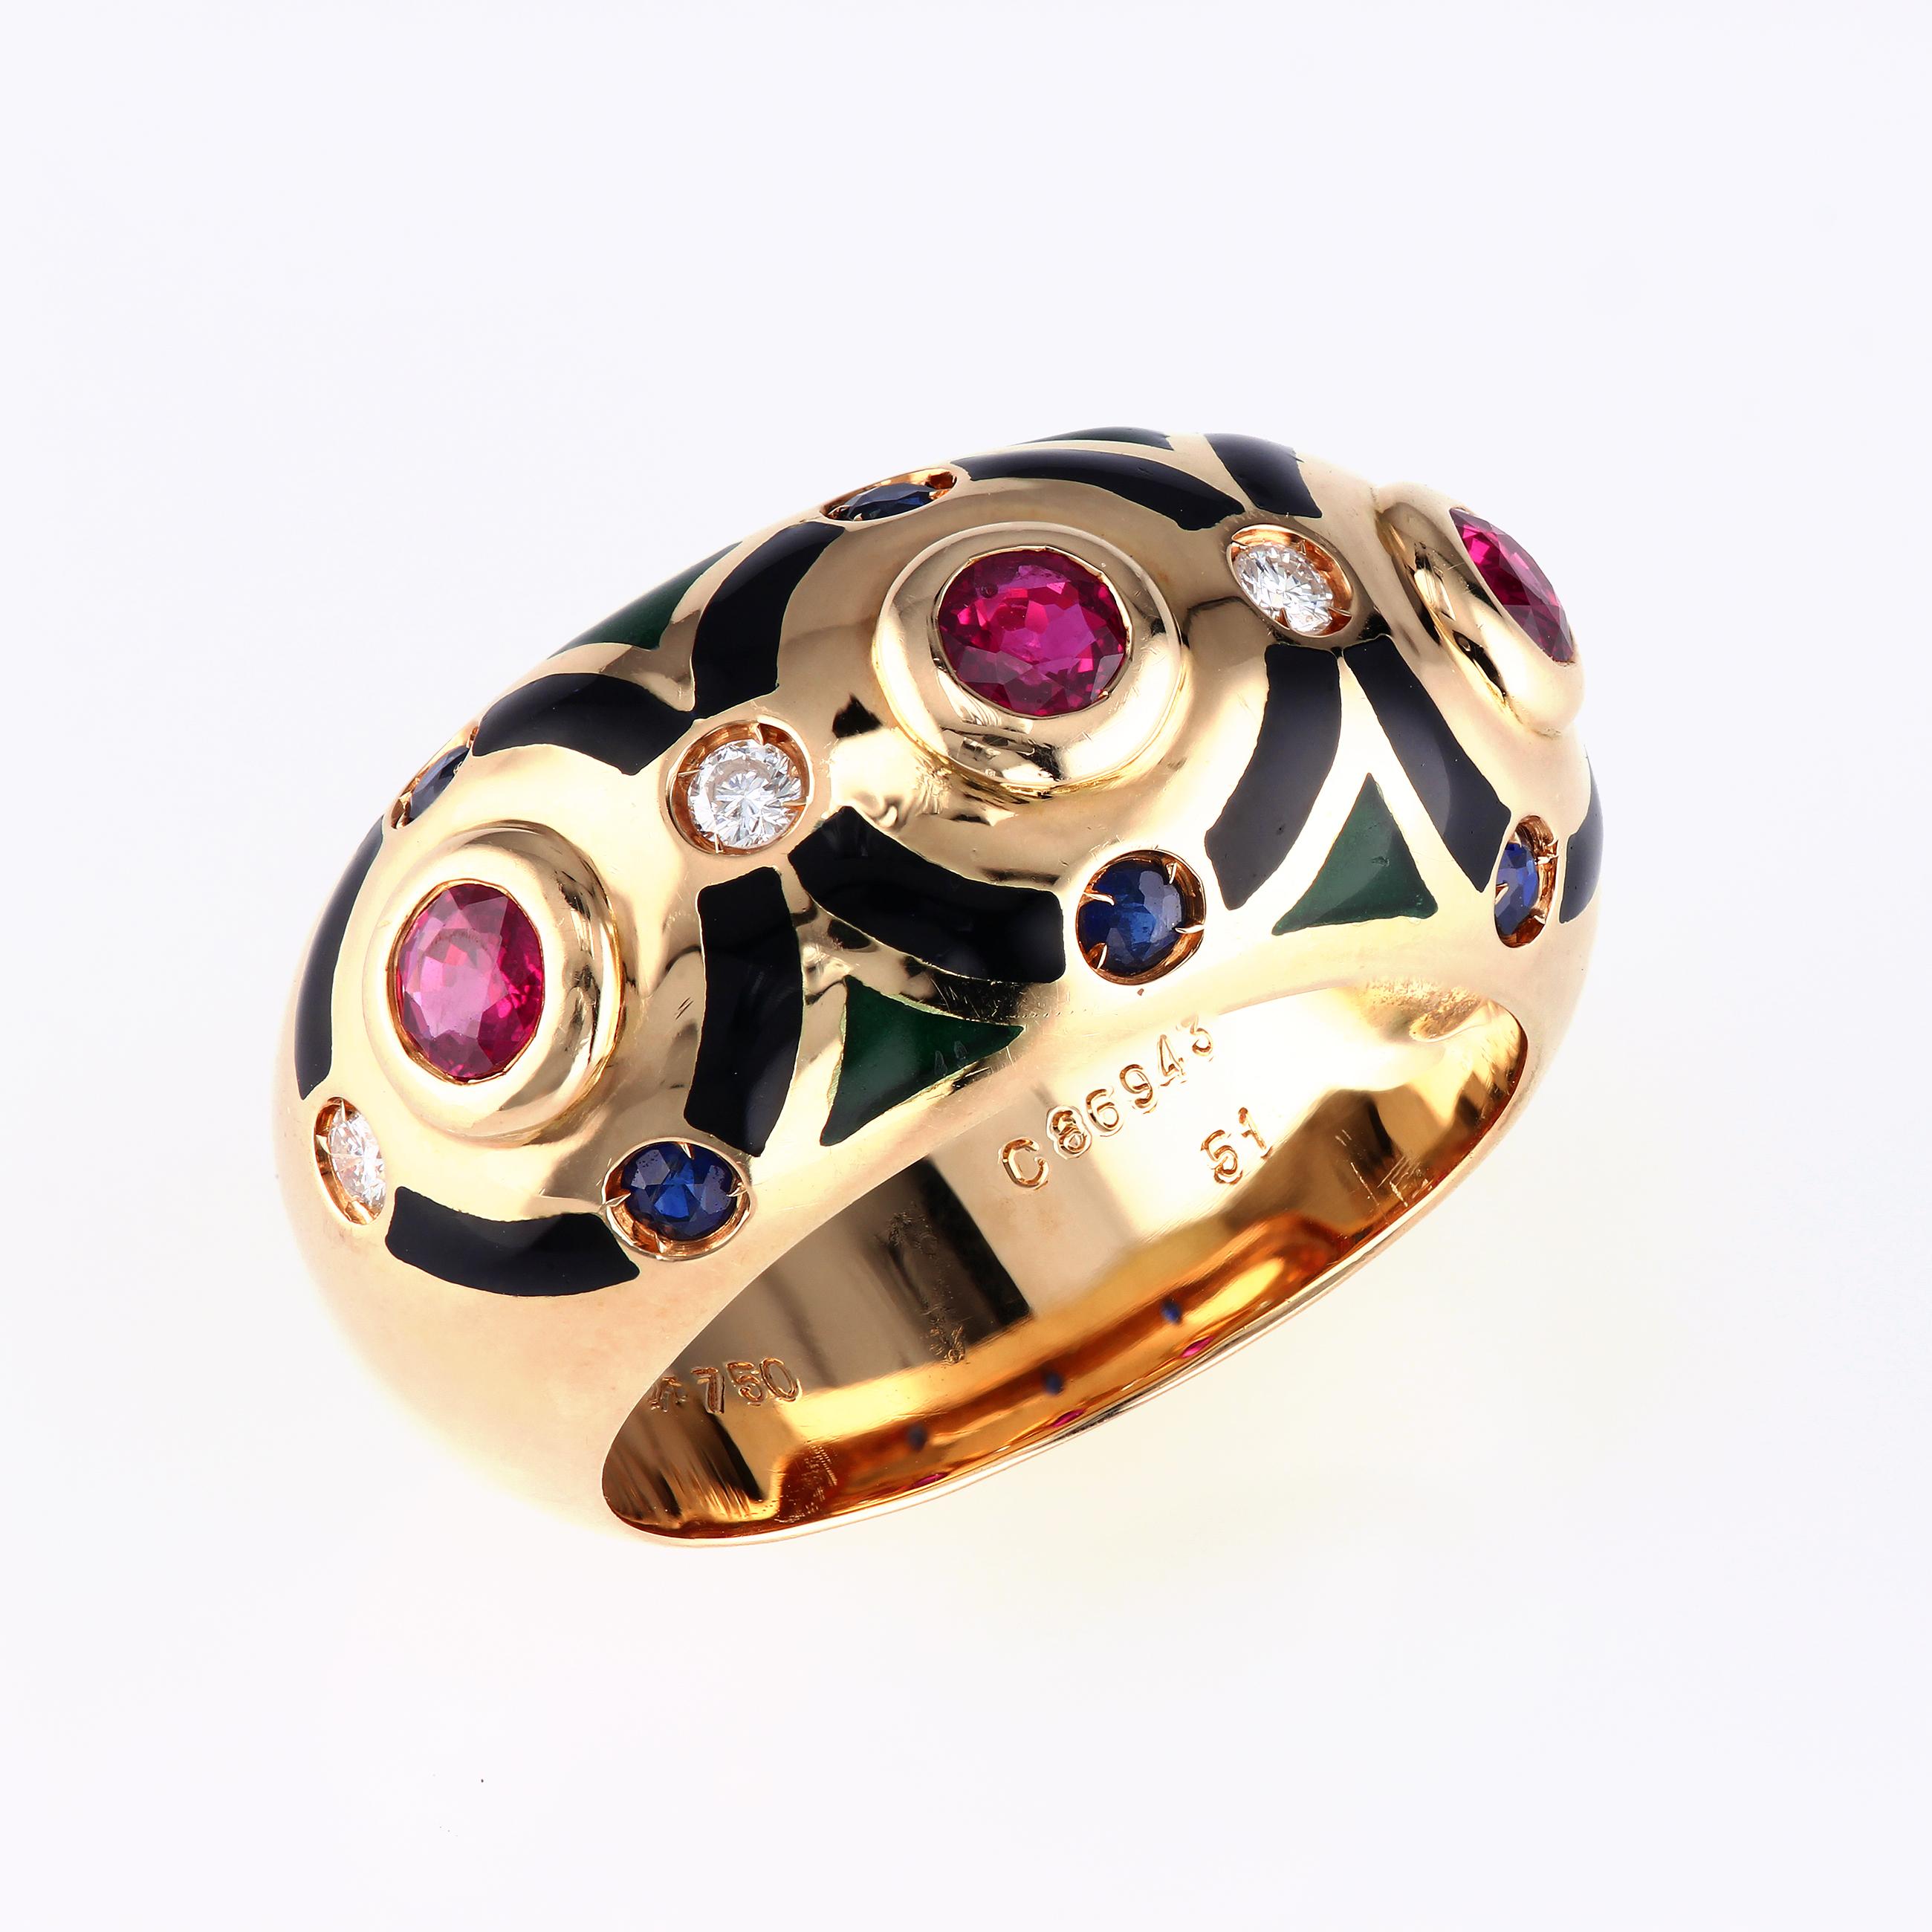 Vintage Cartier ring with rubies, diamonds and black enamel
12.7 g
22.7 x 22 x 11
4.3 x 8.6 mm
Serial number C86943
Size 5 1/2 - French 51
circa 1994
No box
Pre-owned